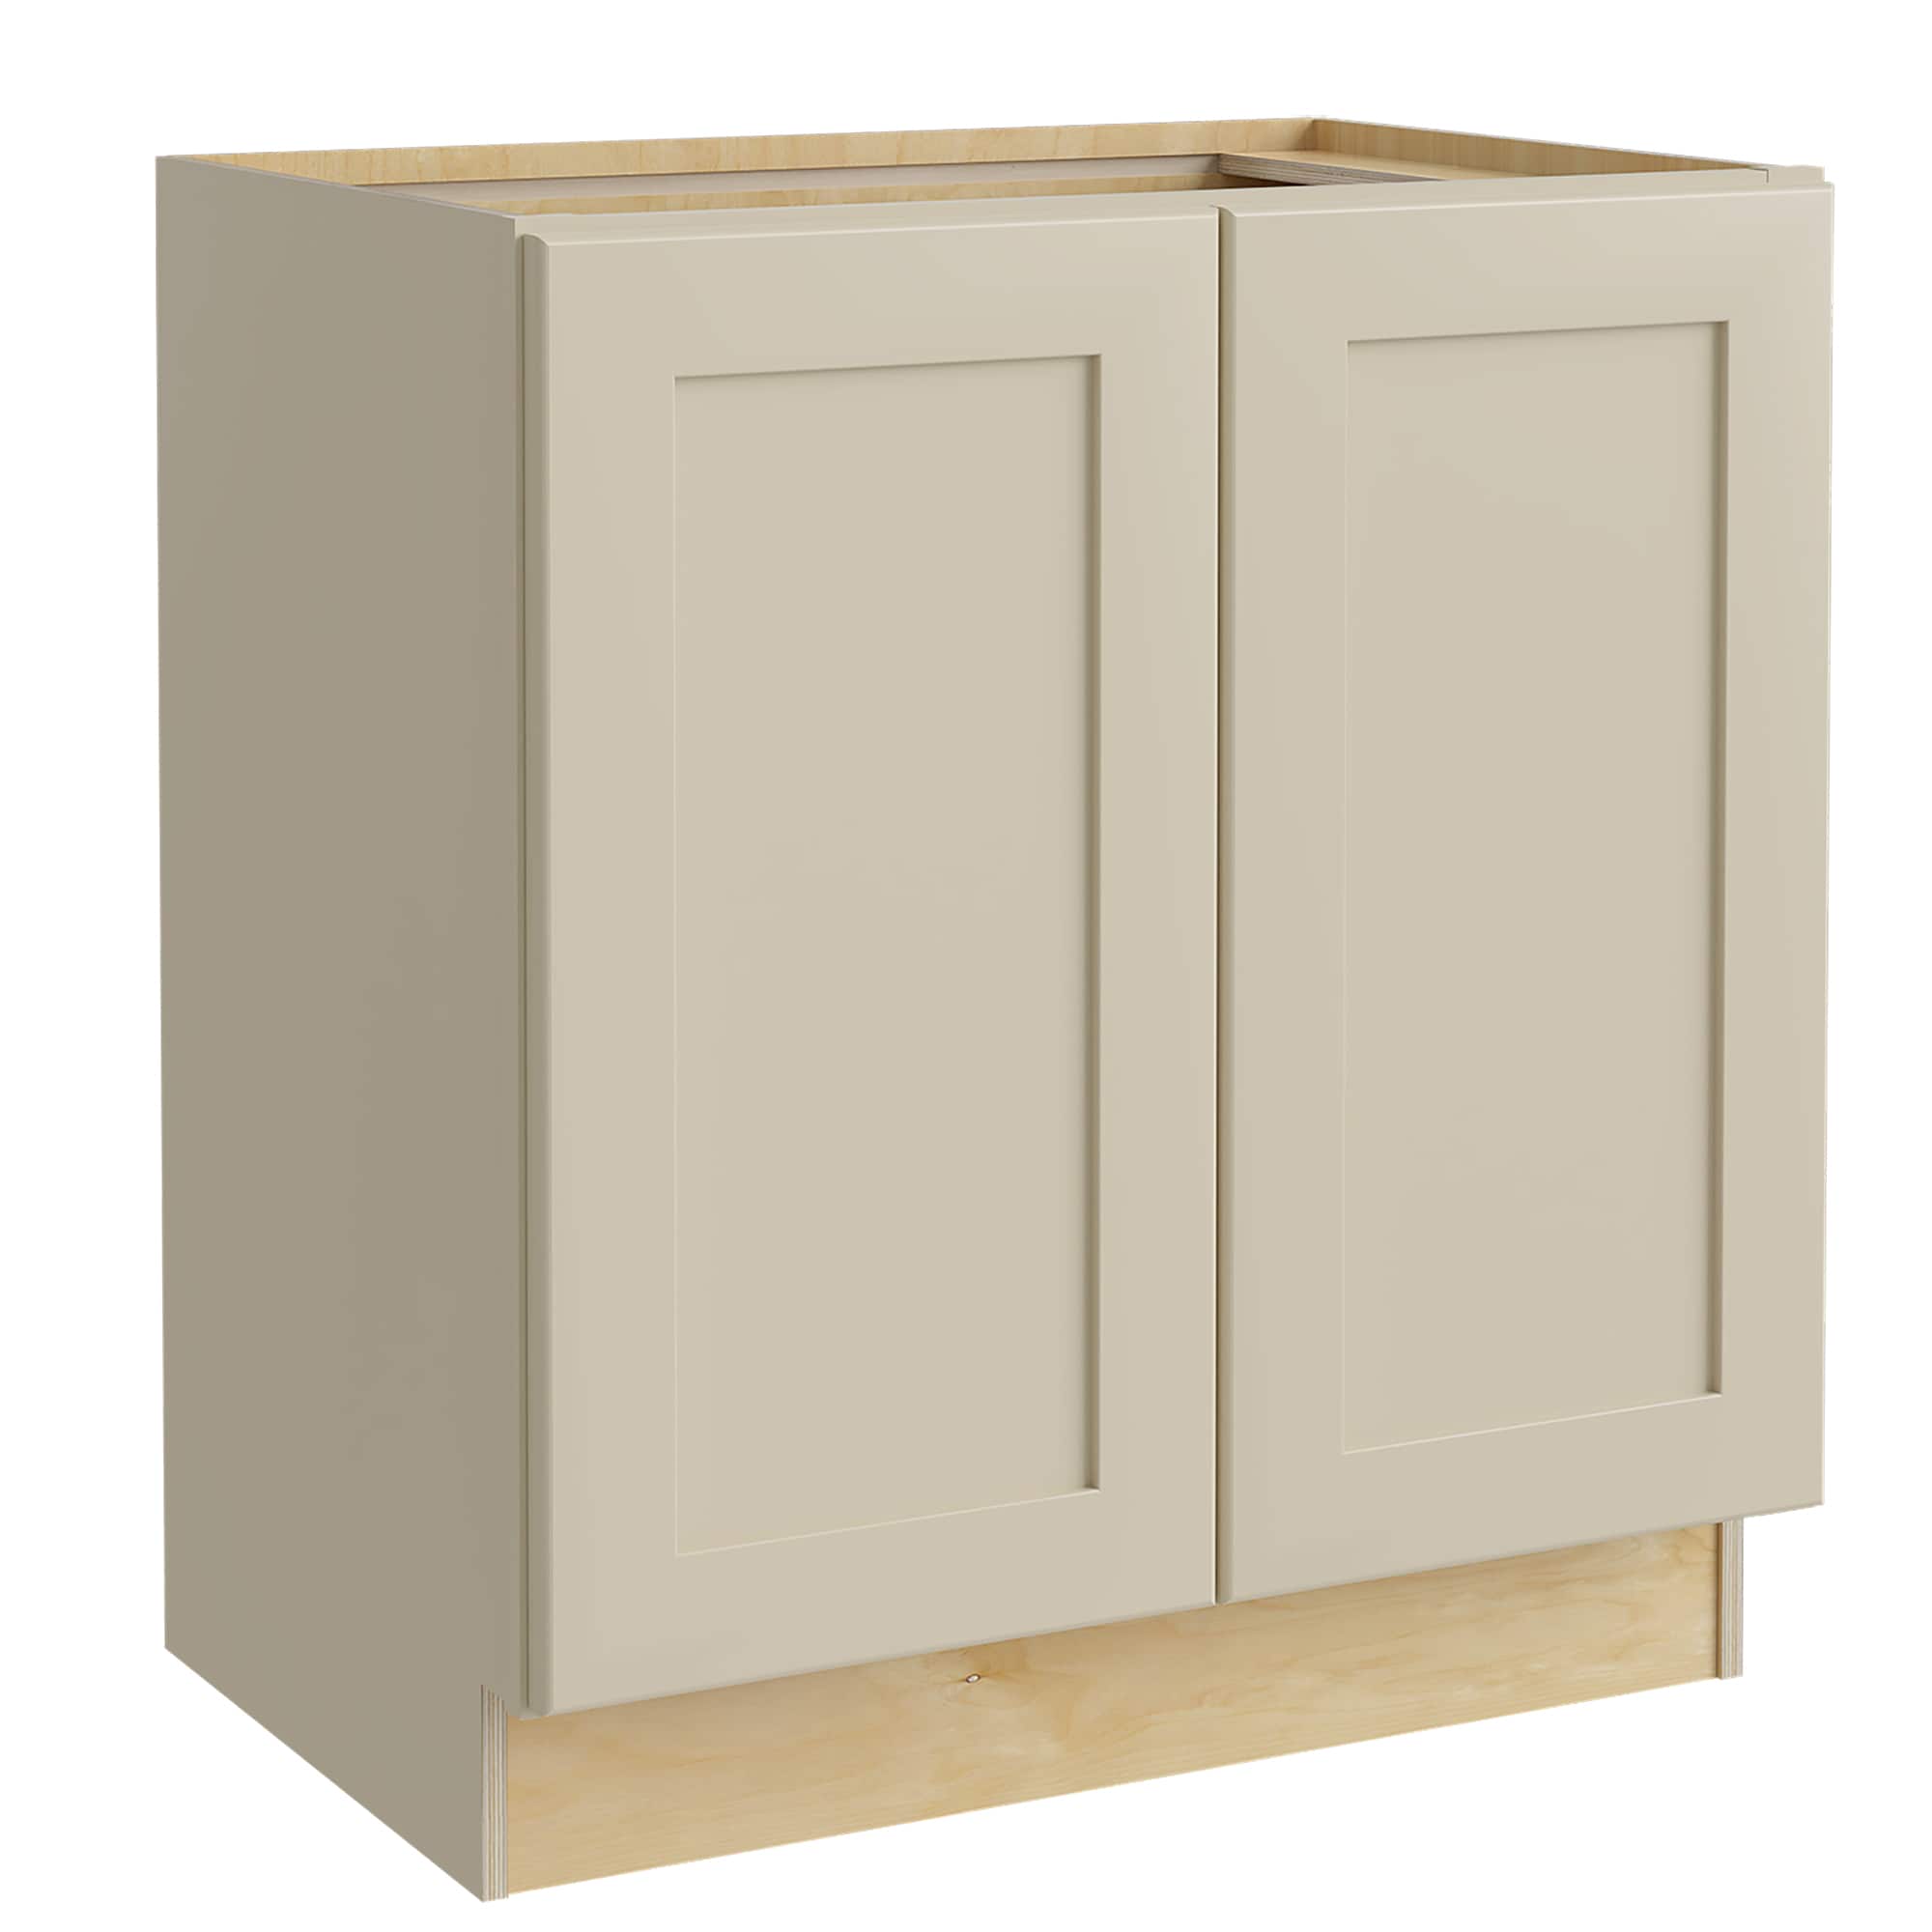 Luxxe Cabinetry 36-in W x 34.5-in H x 24-in D Norfolk Blended Cream Painted Door Base Fully Assembled Semi-custom Cabinet in Off-White | B36FH-NBC